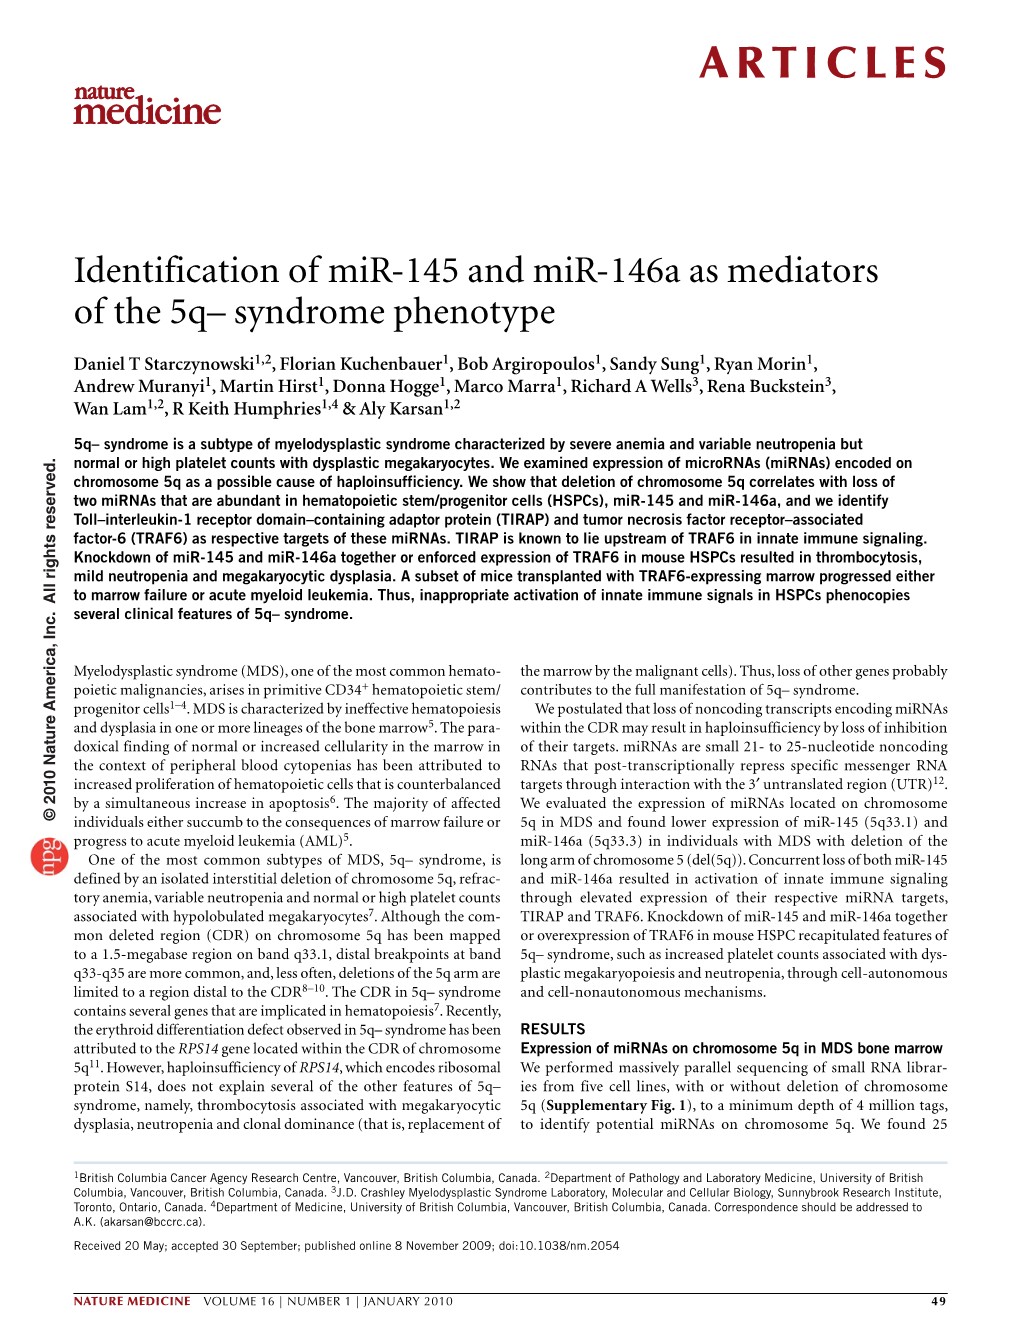 Identification of Mir145 and Mir146a As Mediators of the 5Q